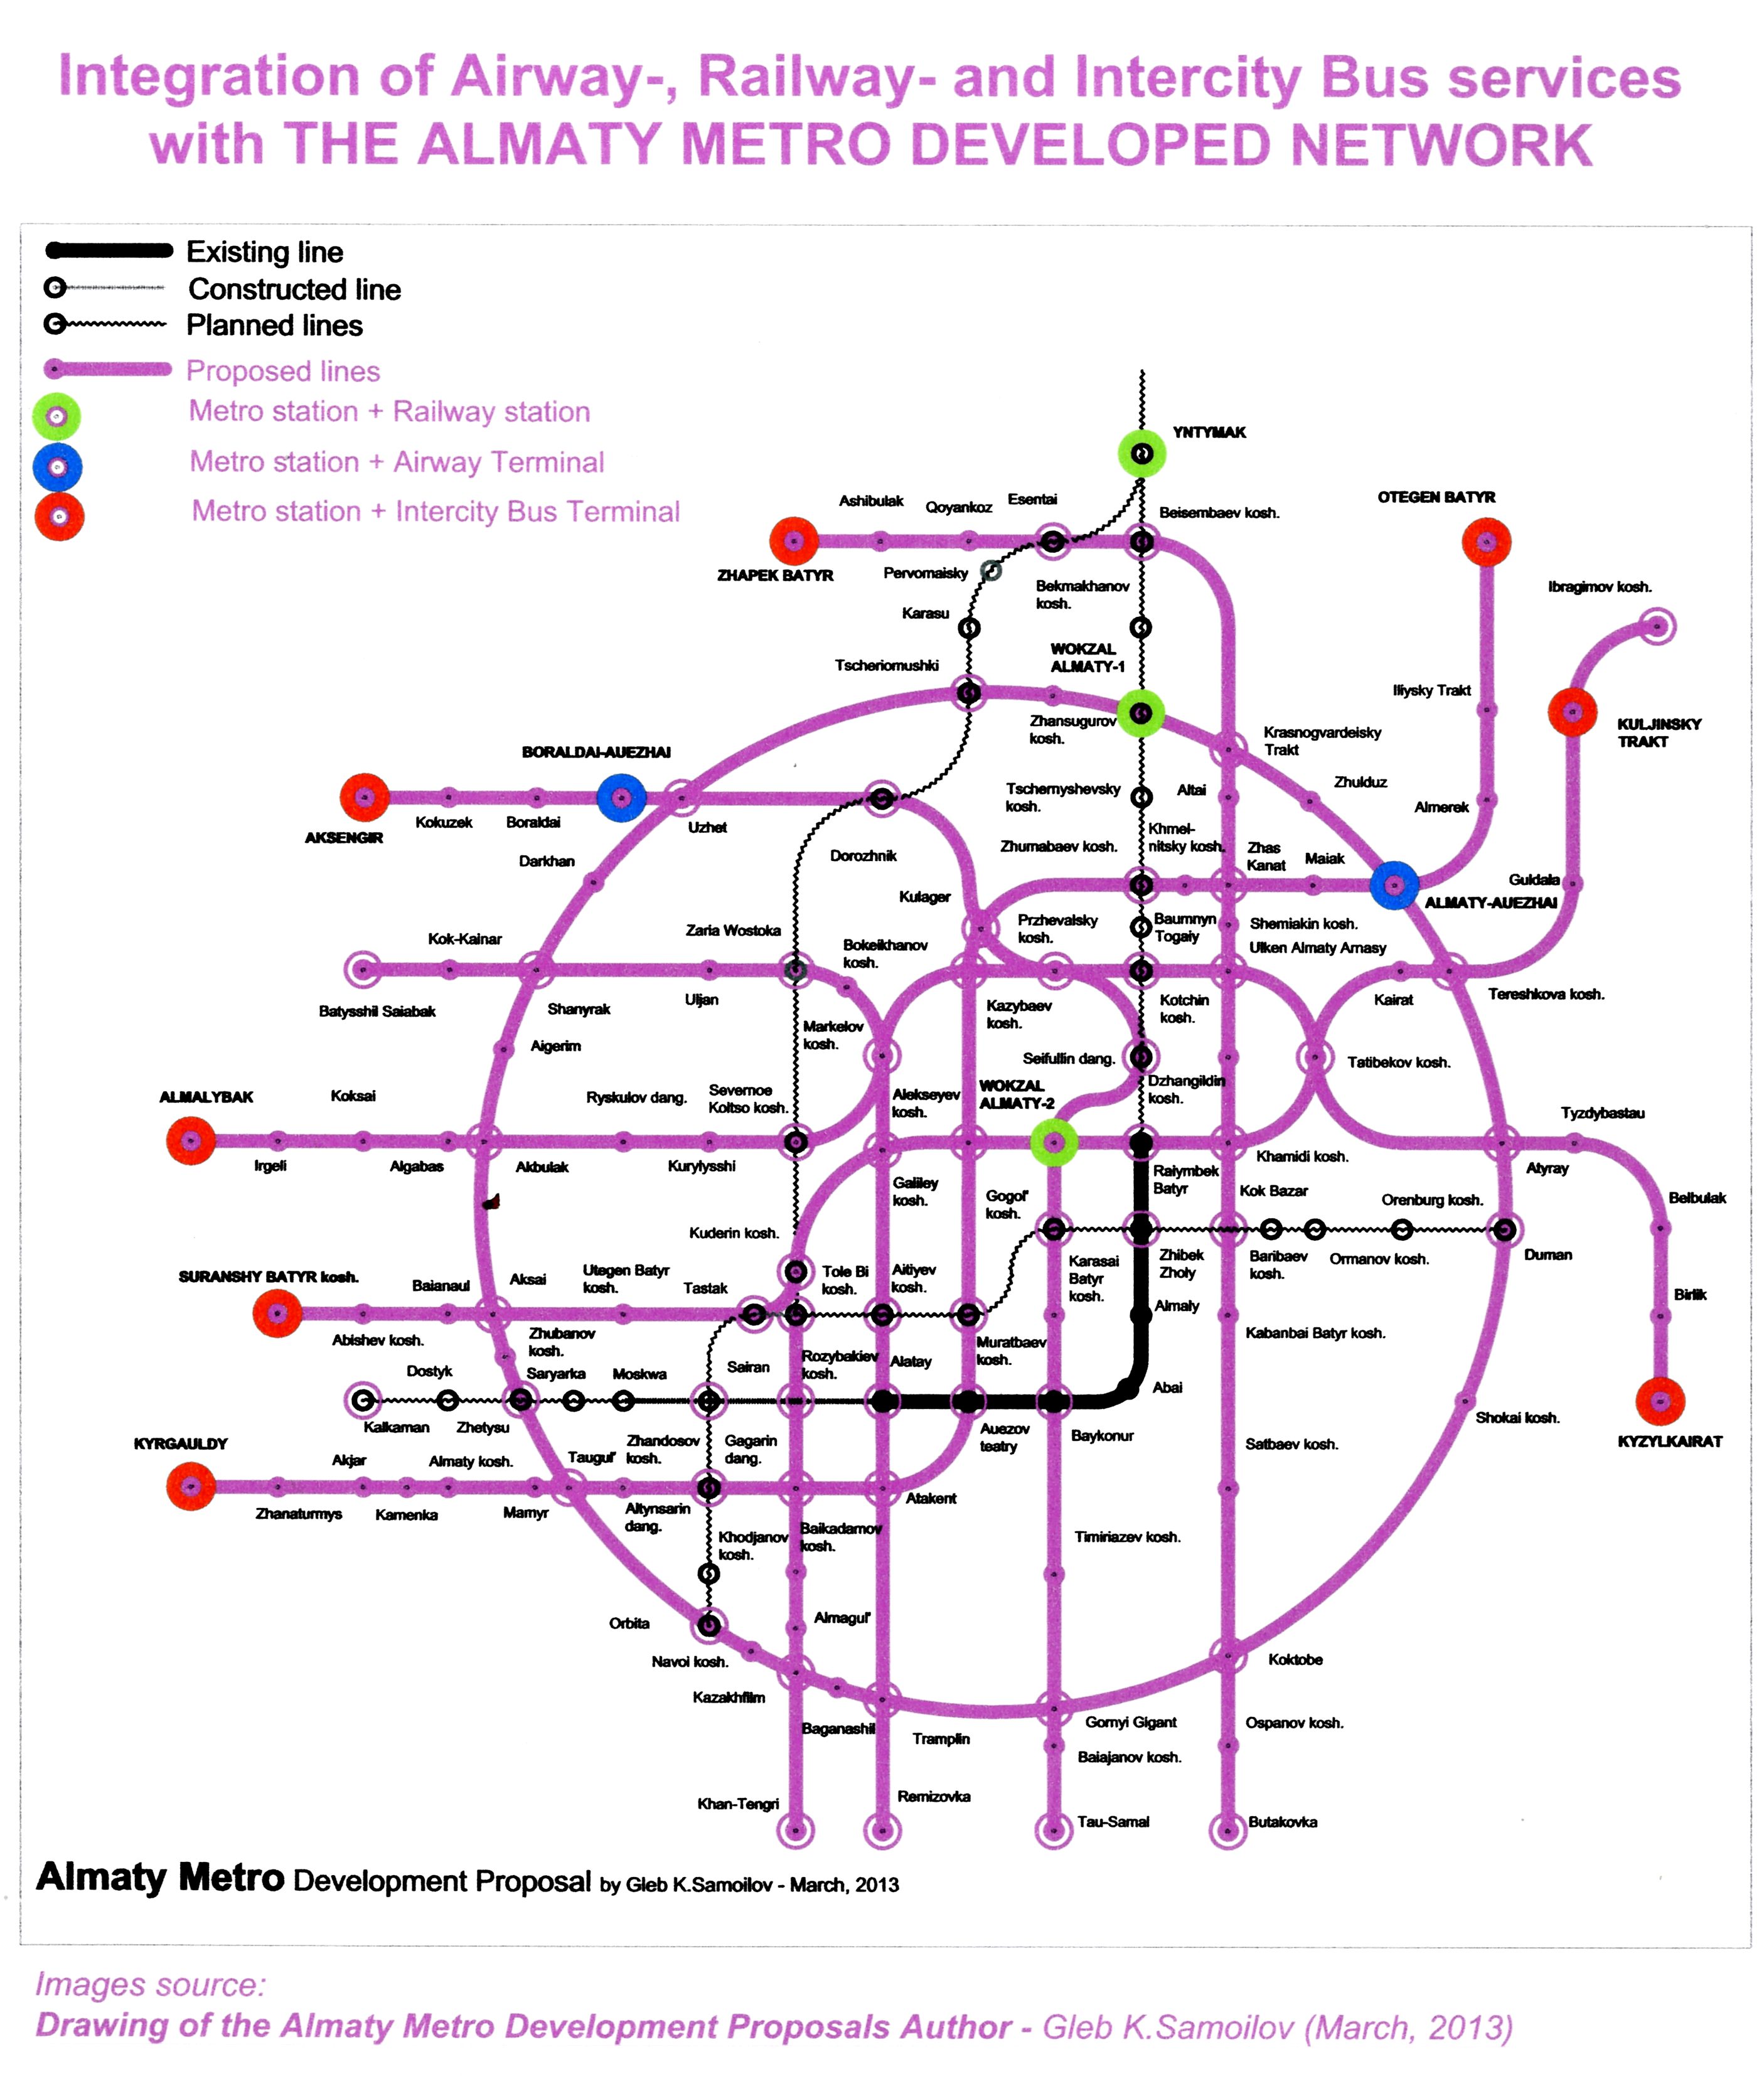 The Almaty Metro Integration with Airway-, Railway- and Intercity Bus services